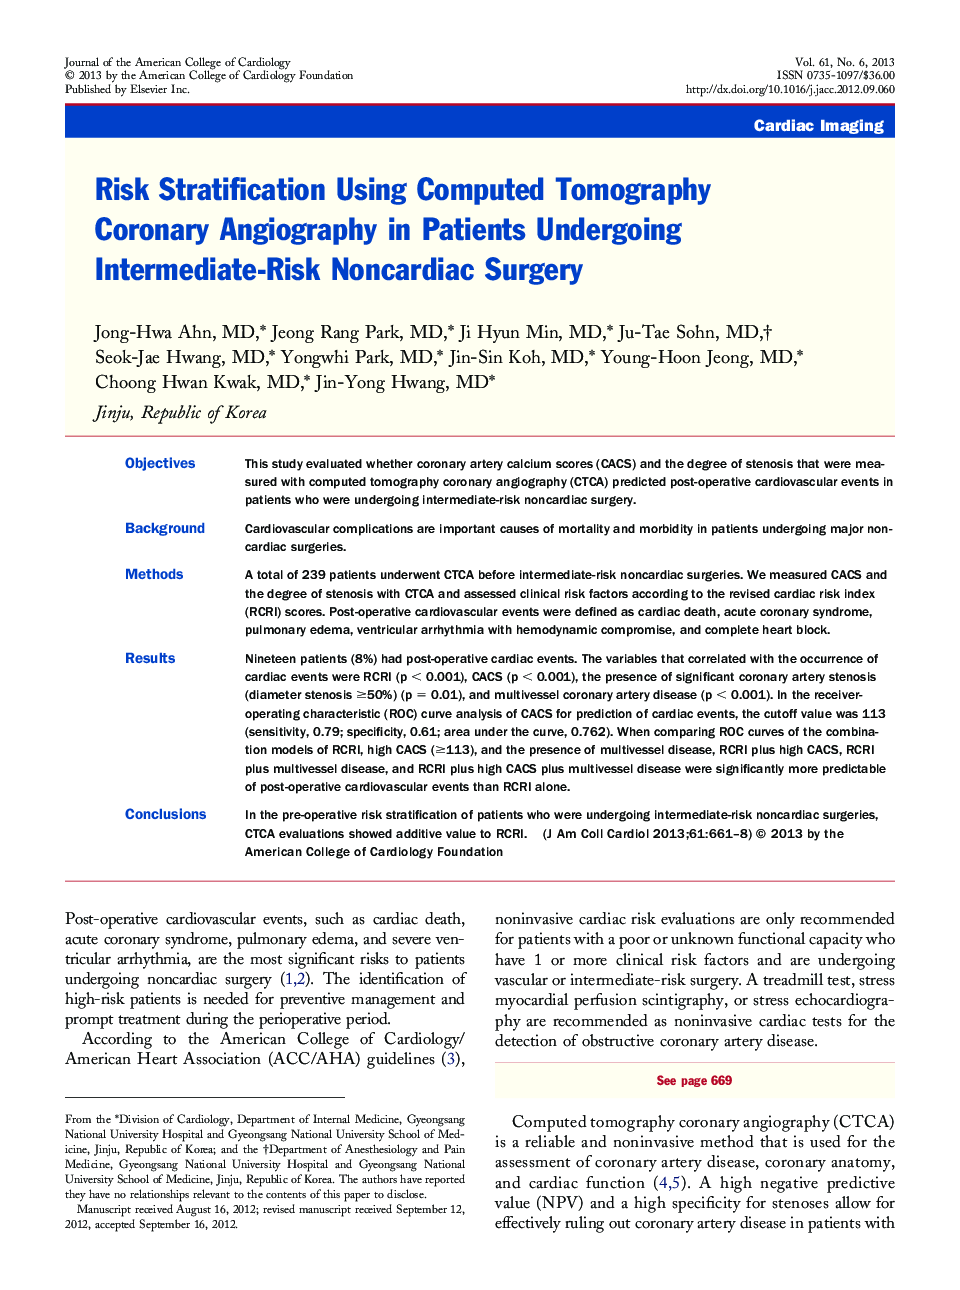 Risk Stratification Using Computed Tomography Coronary Angiography in Patients Undergoing Intermediate-Risk Noncardiac Surgery 